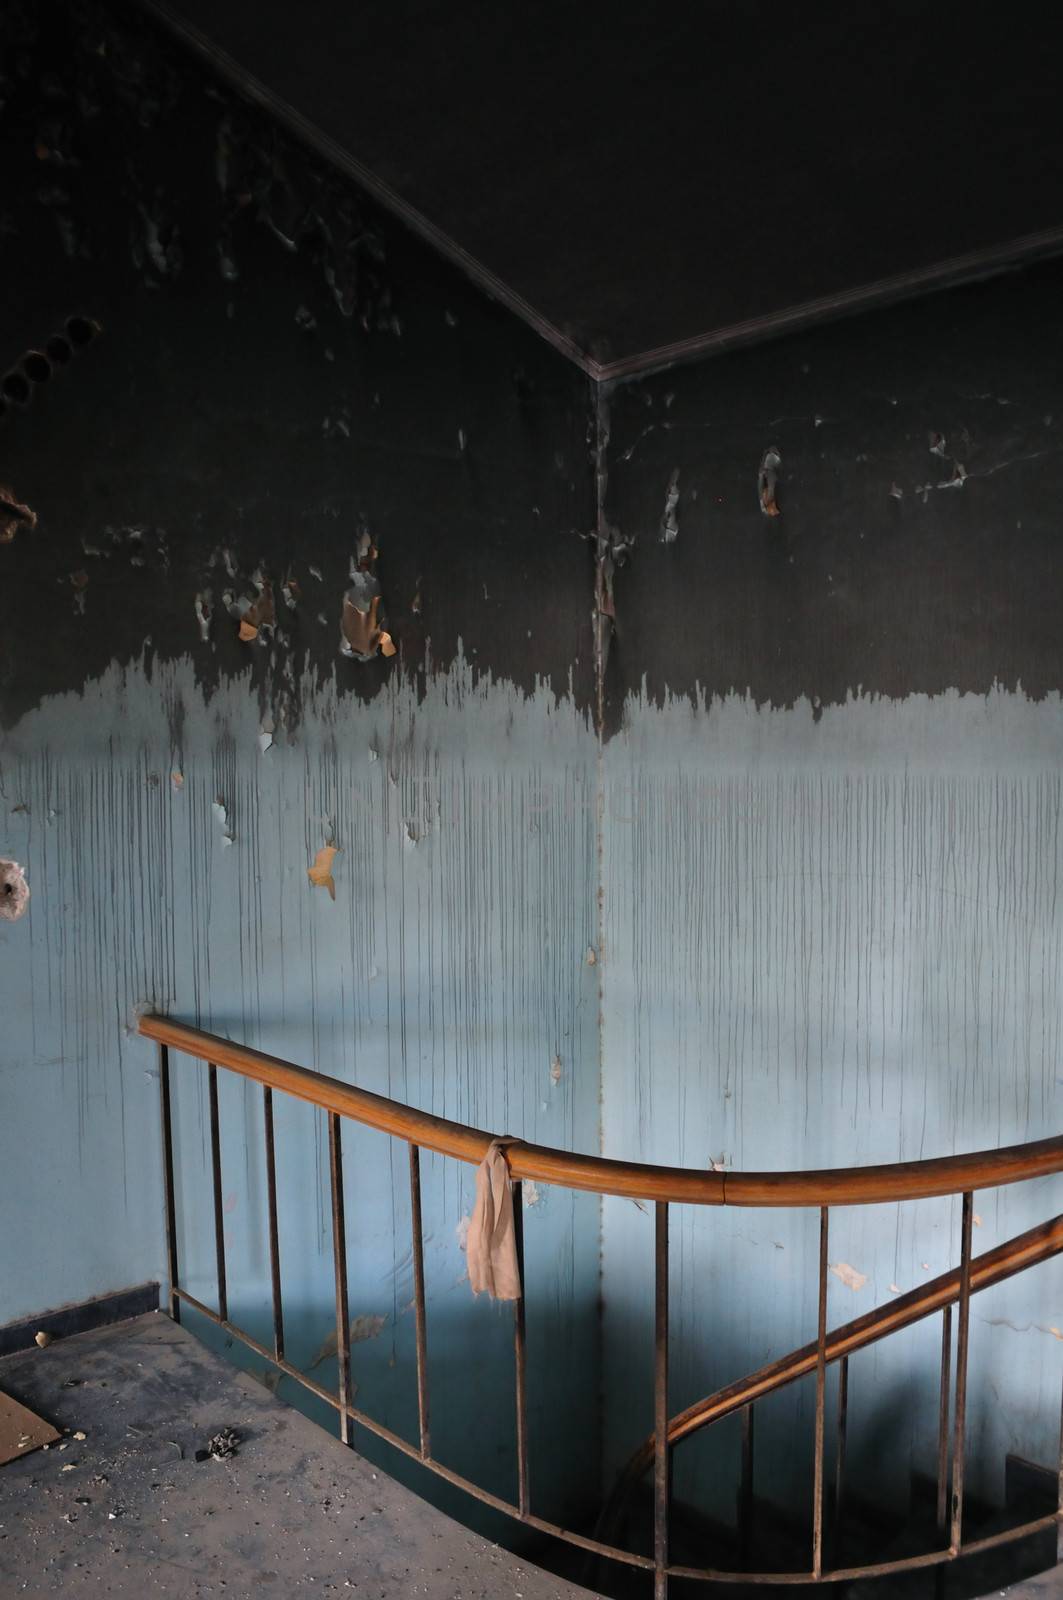 stained wall and staircase in abandoned house by sirylok